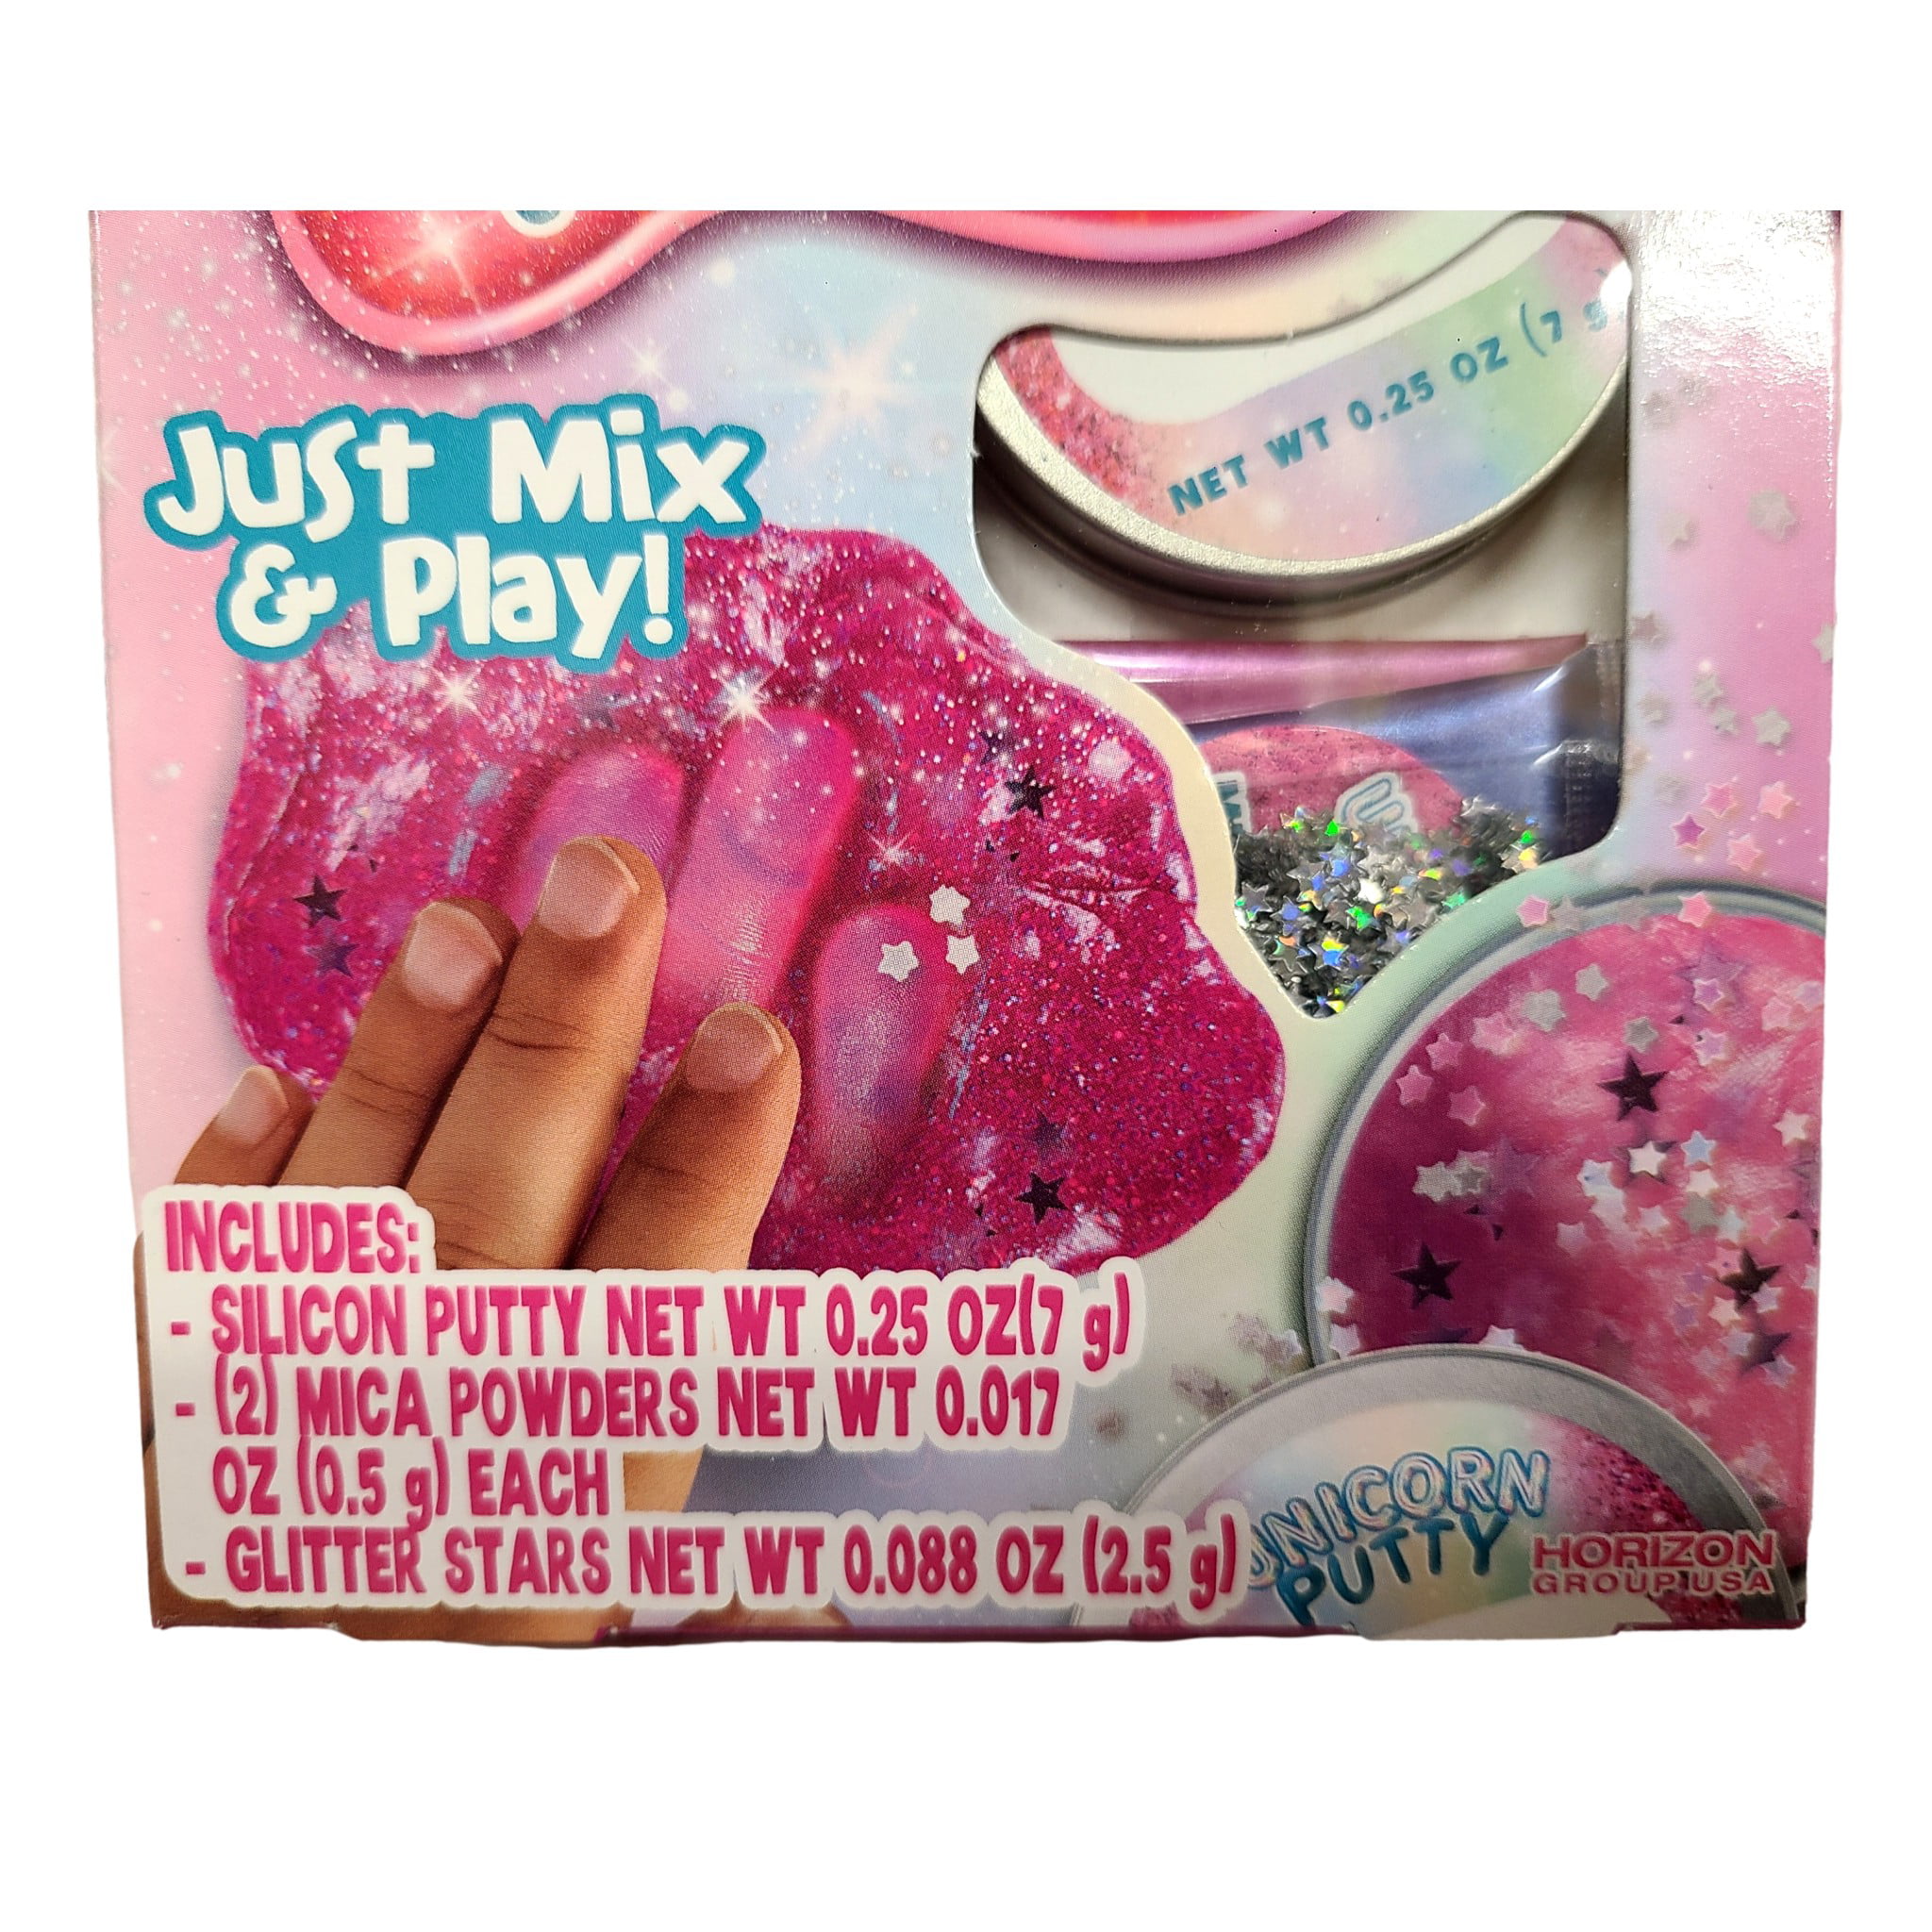  Slimygloop Make Your Own Unicorn DIY Slime Kit by Horizon Group  Usa, Mix & Create Stretchy, Squishy, Gooey, Putty, Pink Magical Unicorn  Slime- Unicorn 9.7 x 8.5 x 8.7 : Toys & Games